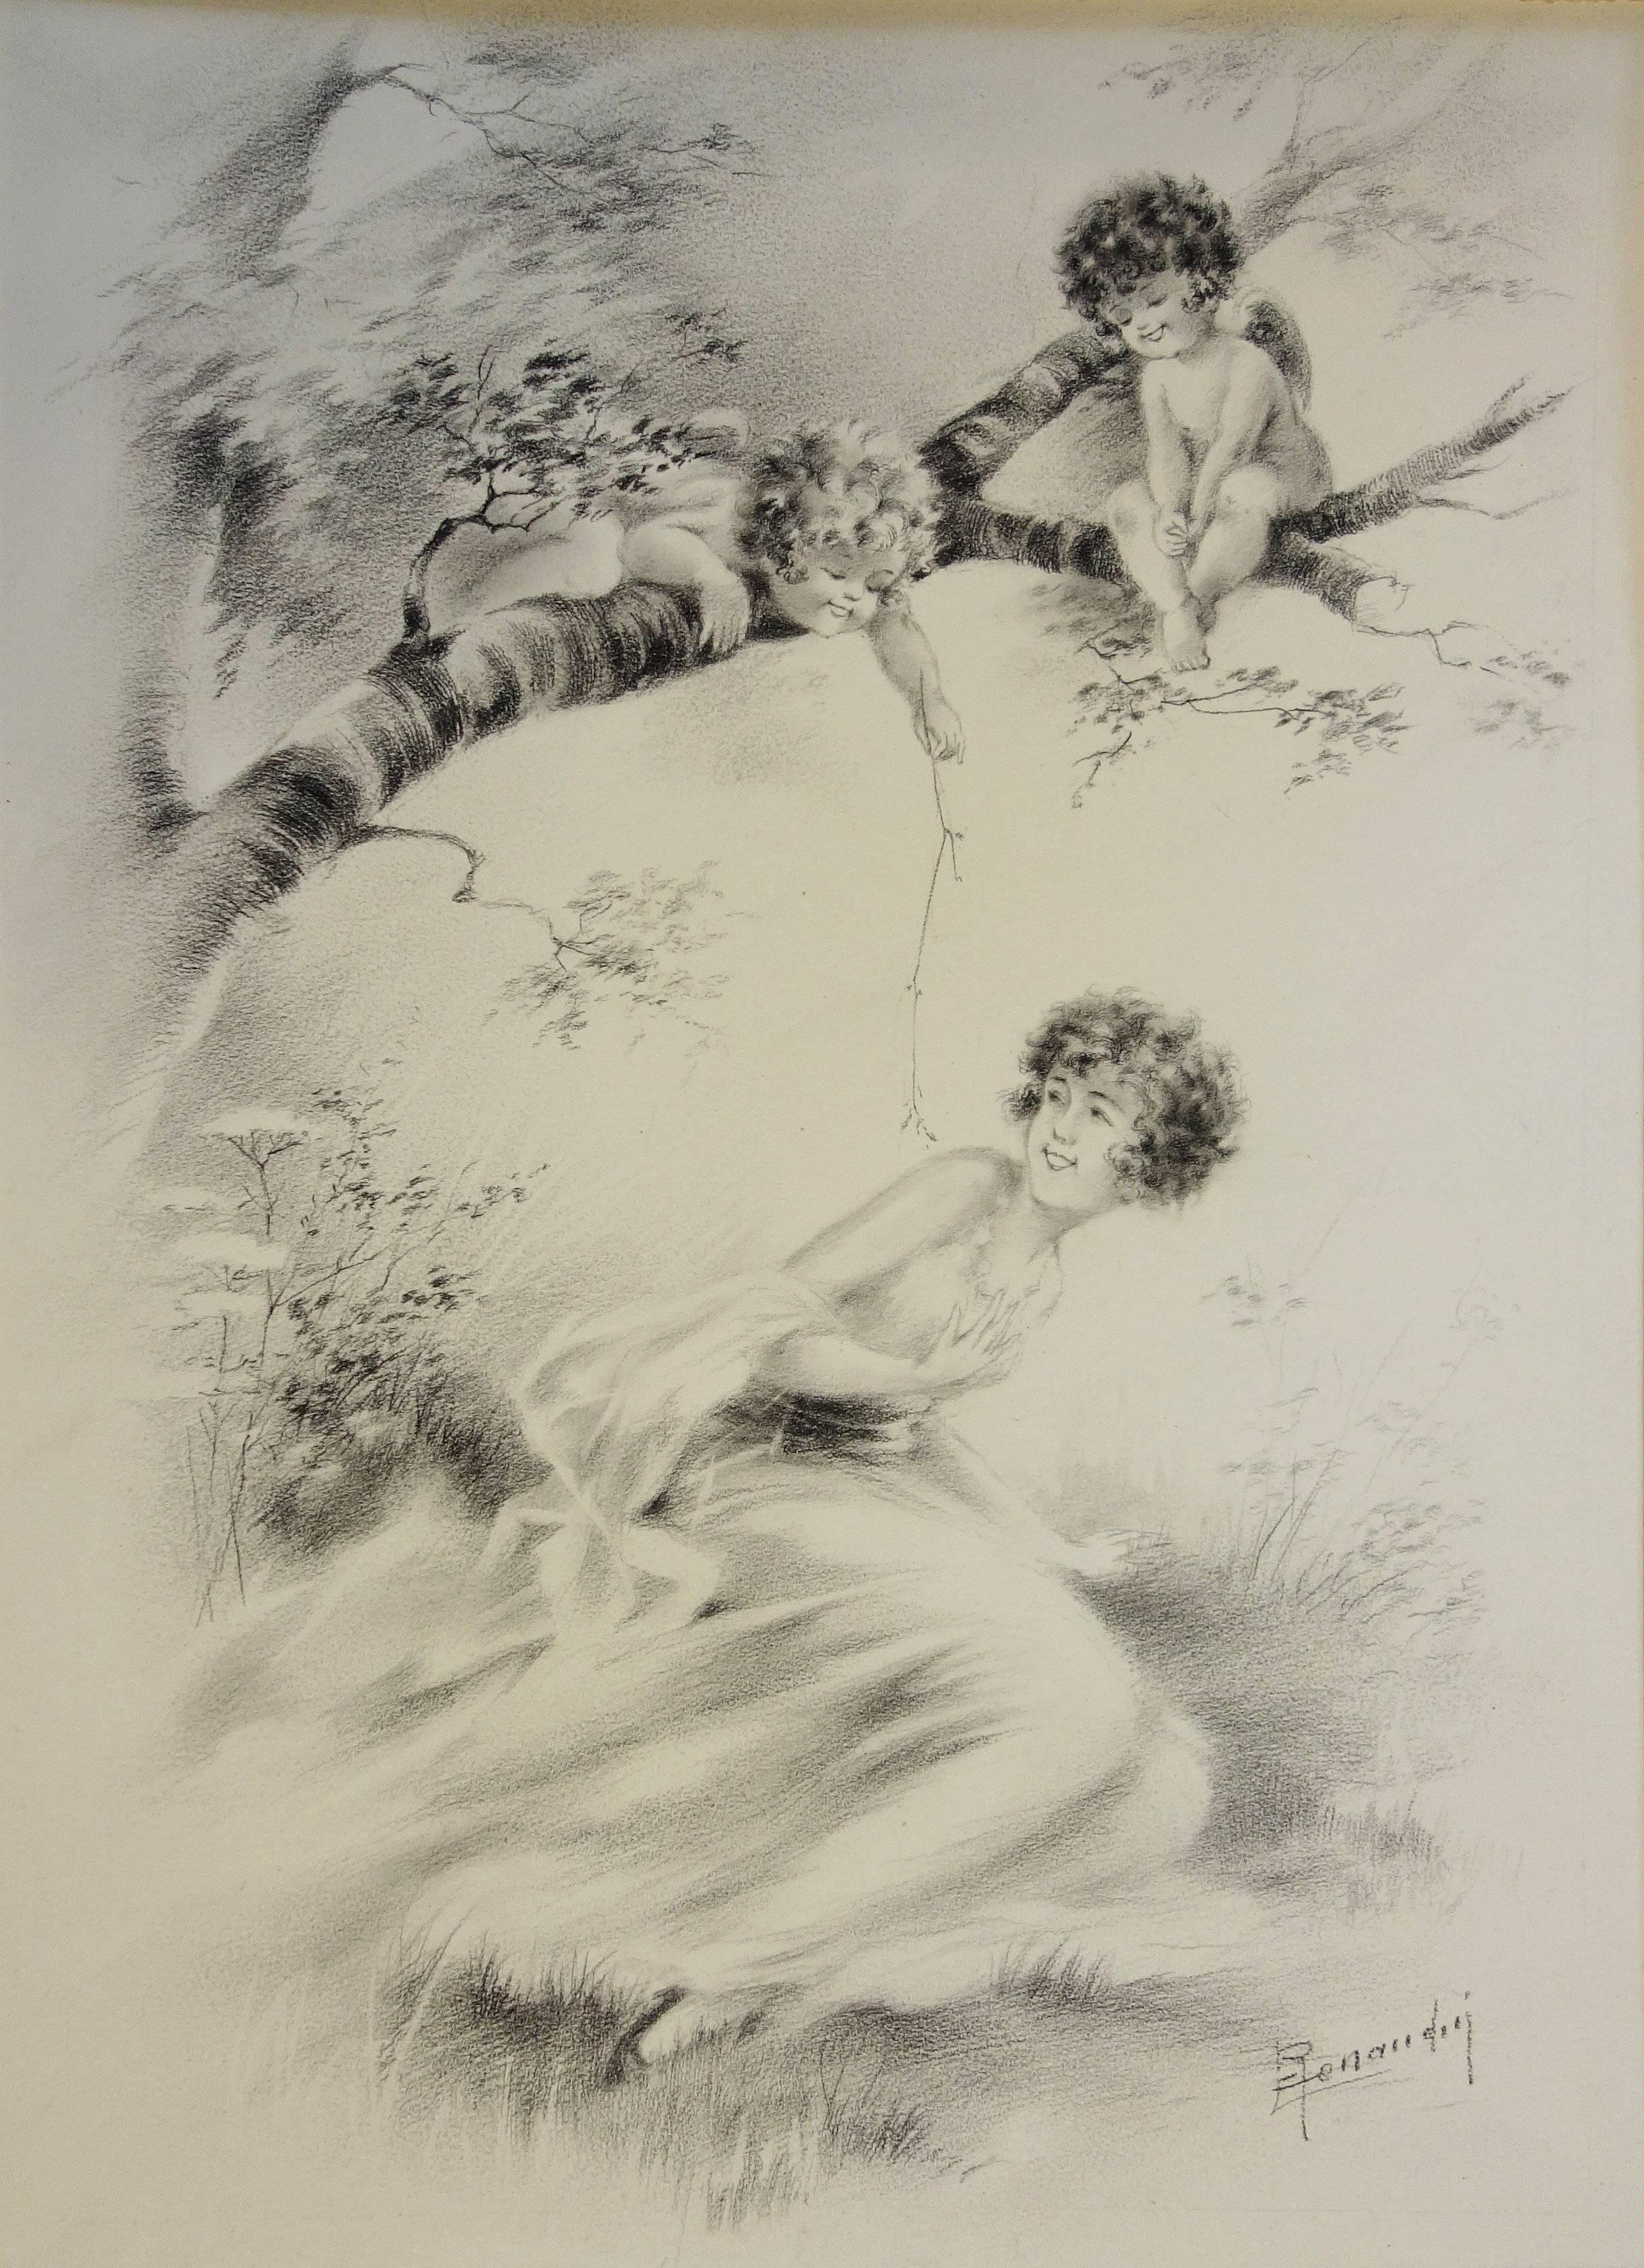 Alfred Renaudin (Naudy) Figurative Art - Angels Teasing a Young Woman - Original handsigned drawing -1934